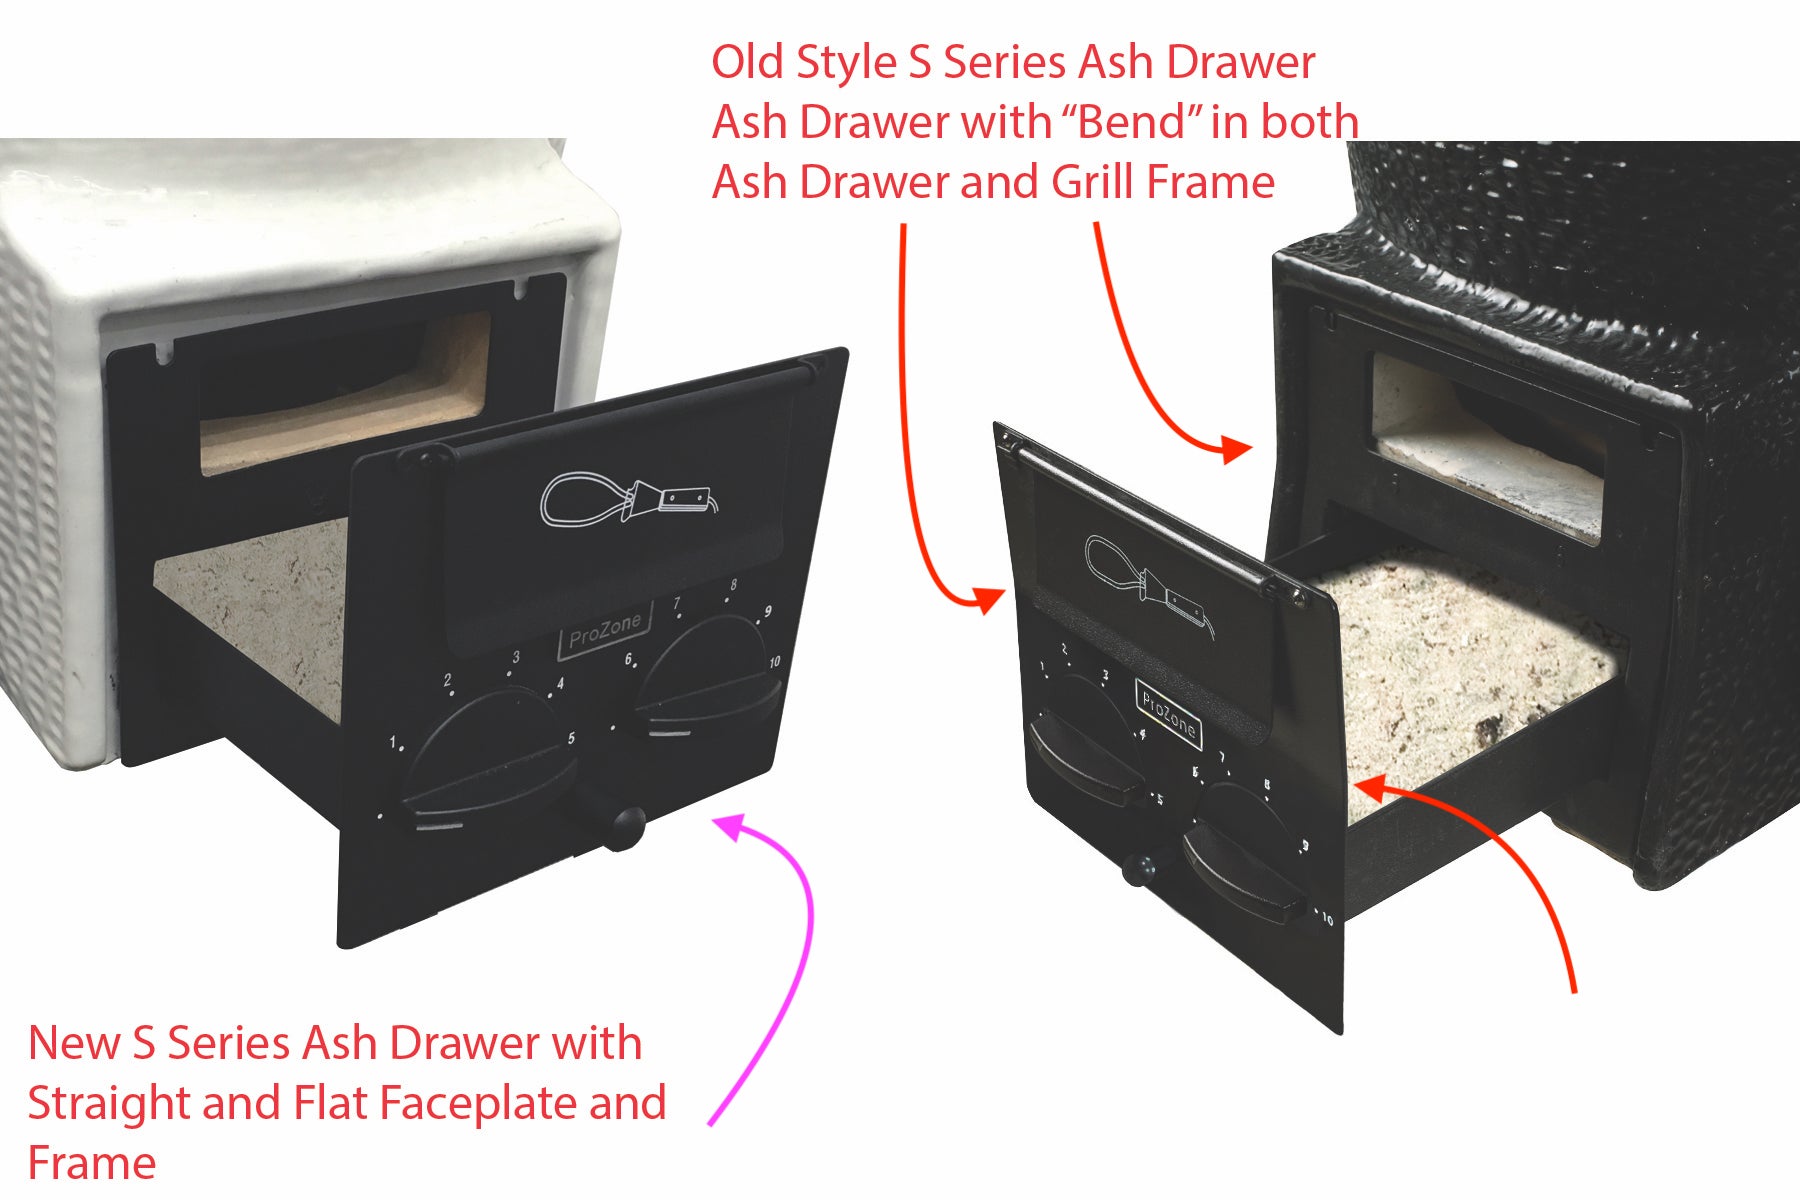 Parts | Ash Drawer | "Old S" Ash Drawer with Bend